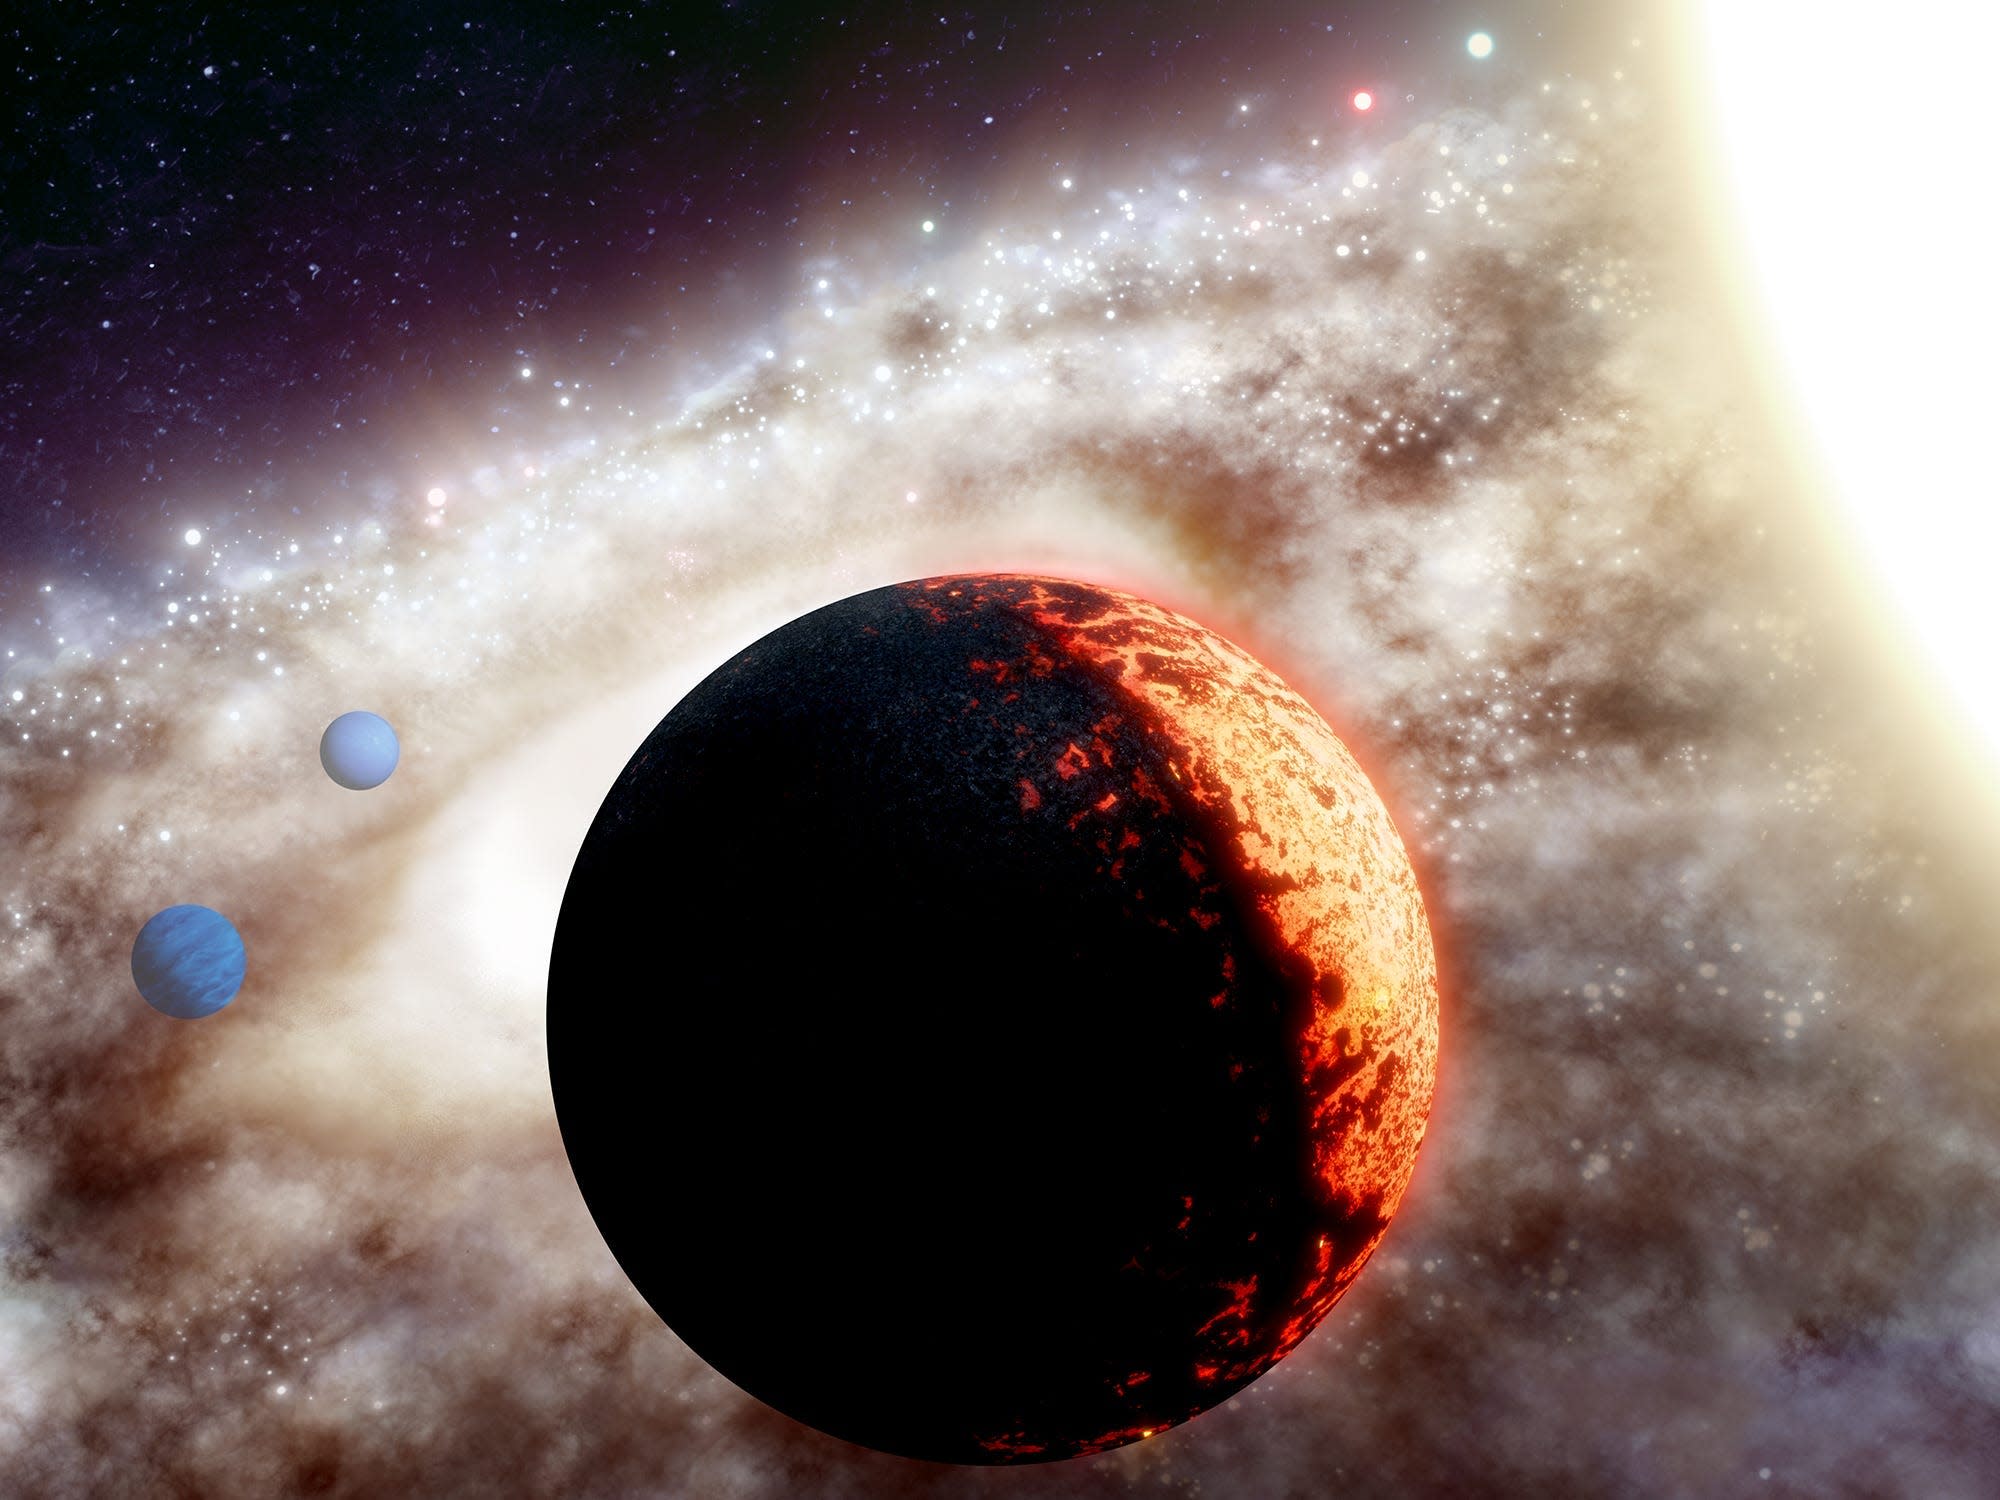 An ancient super-Earth offers an unexpected idea that life in our galaxy may be older than scientists thought